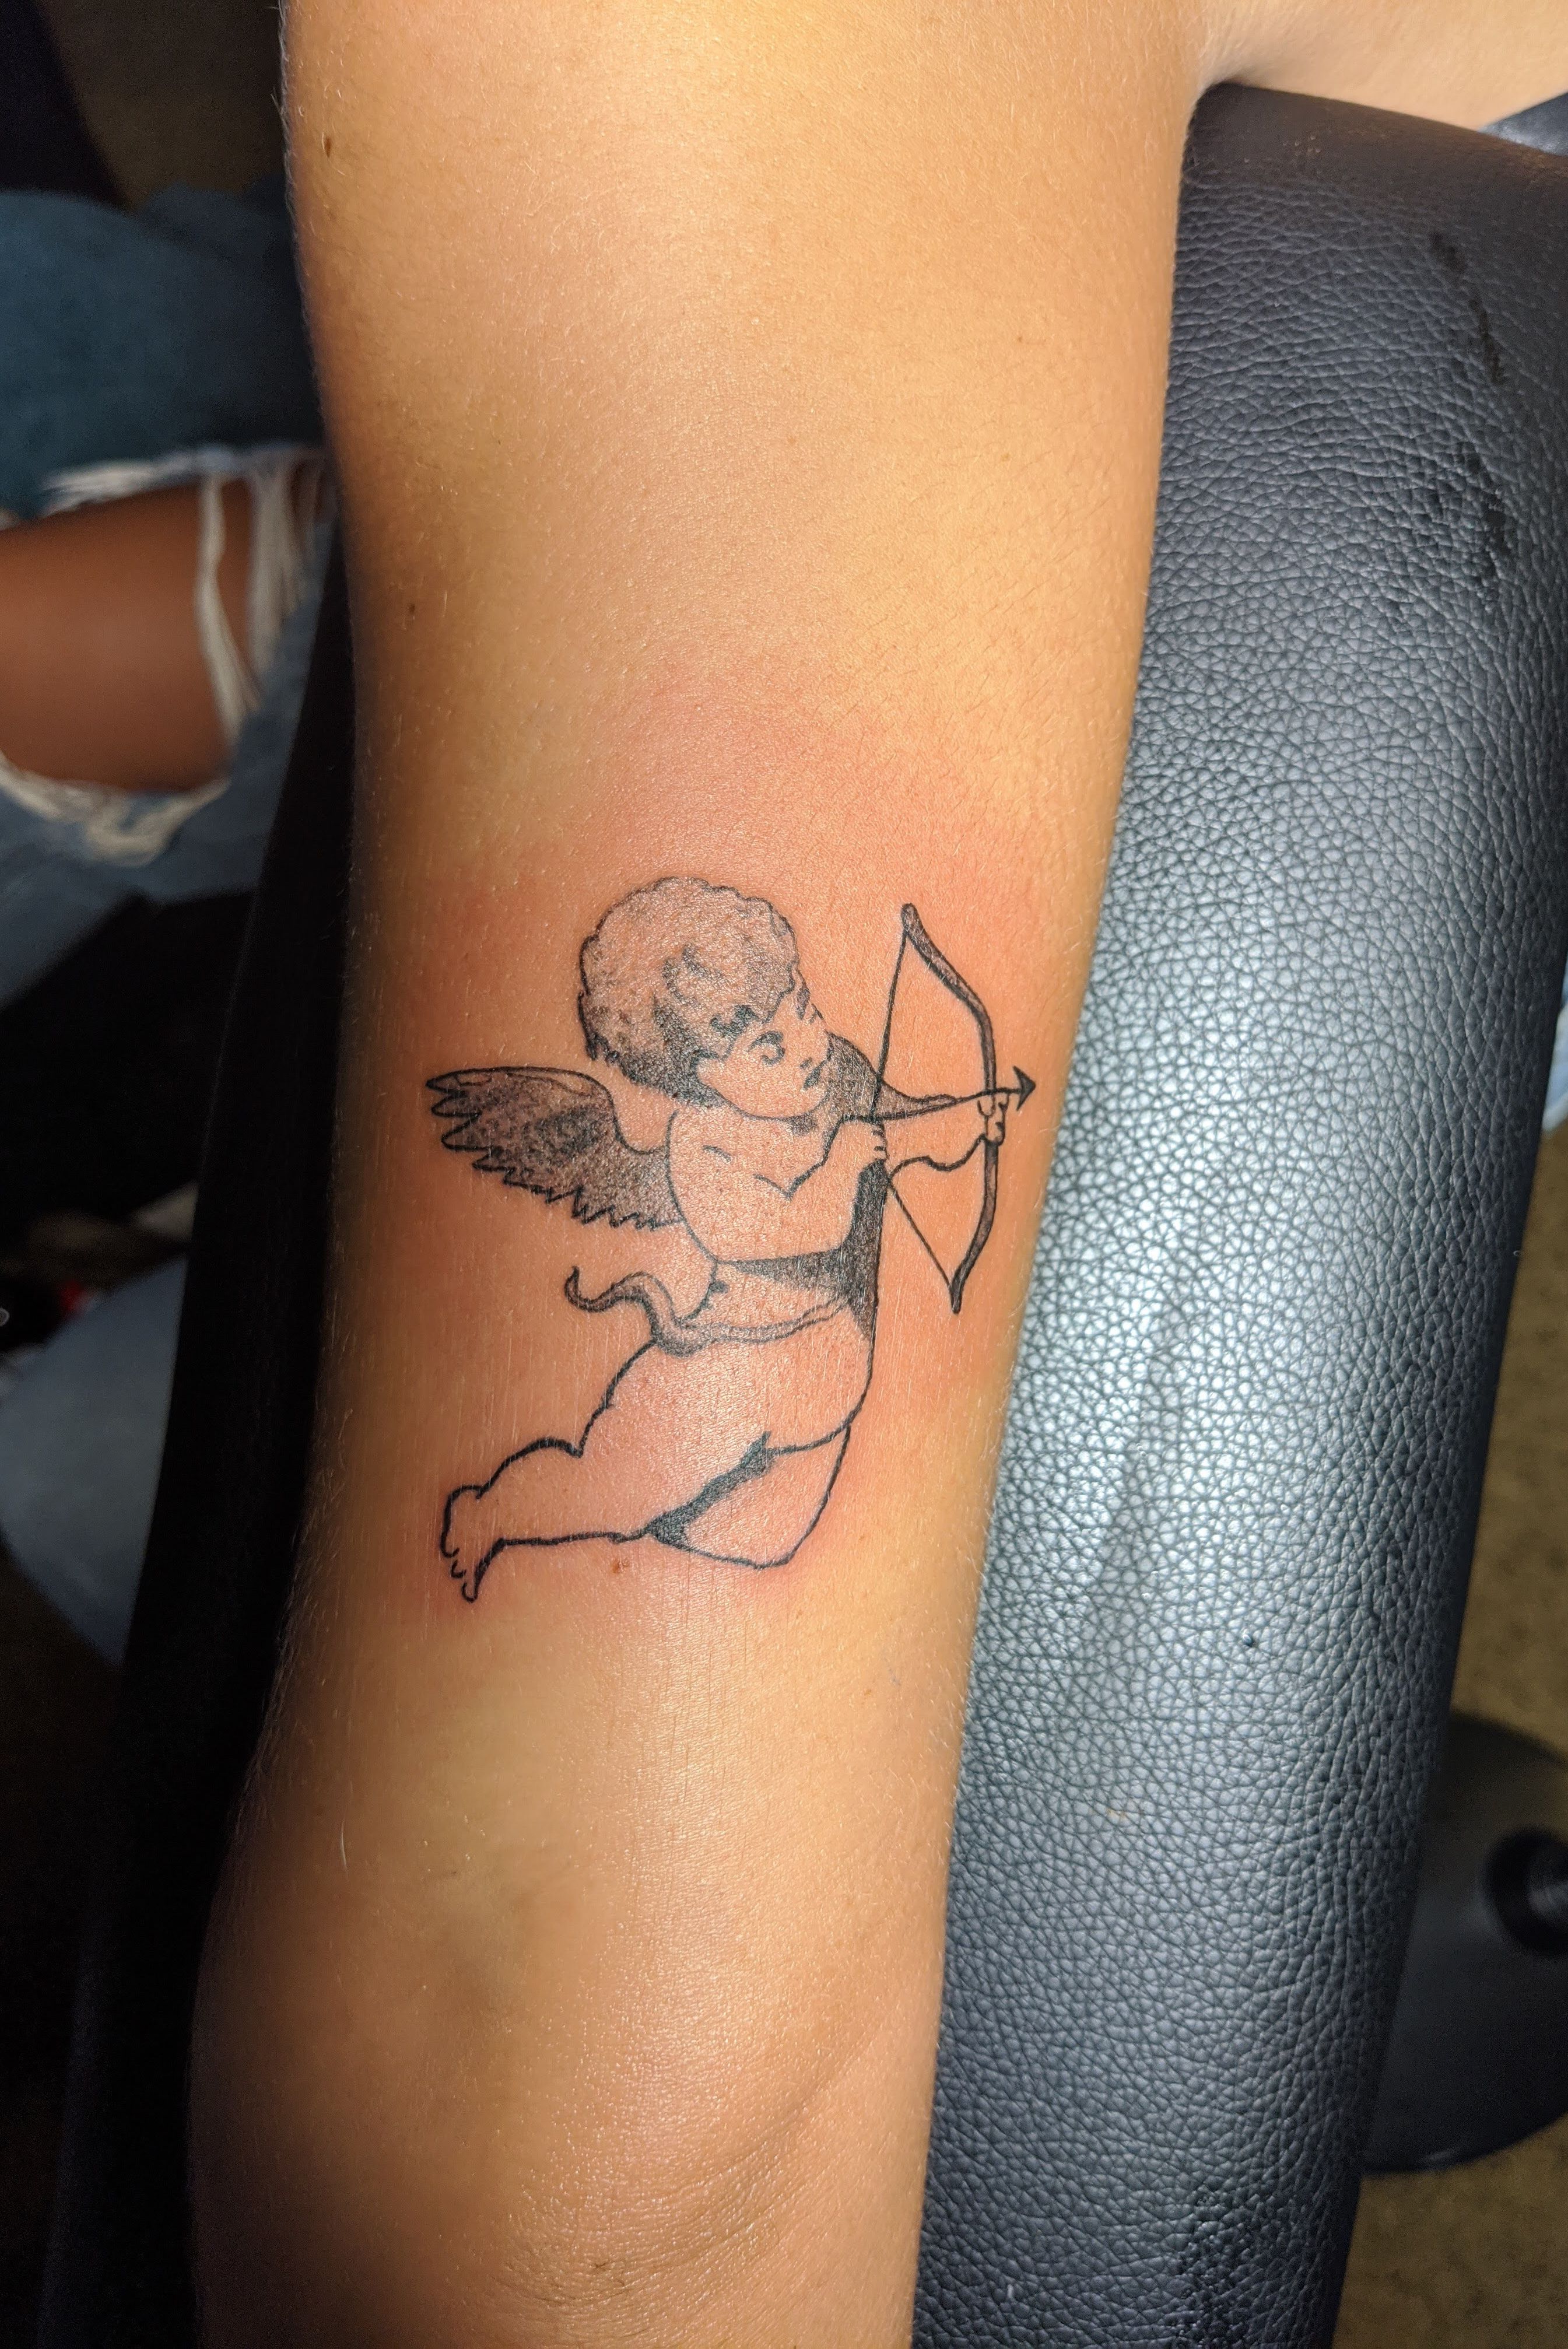 10 Best Cupid Tattoo Ideas You'll Have To See To Believe!